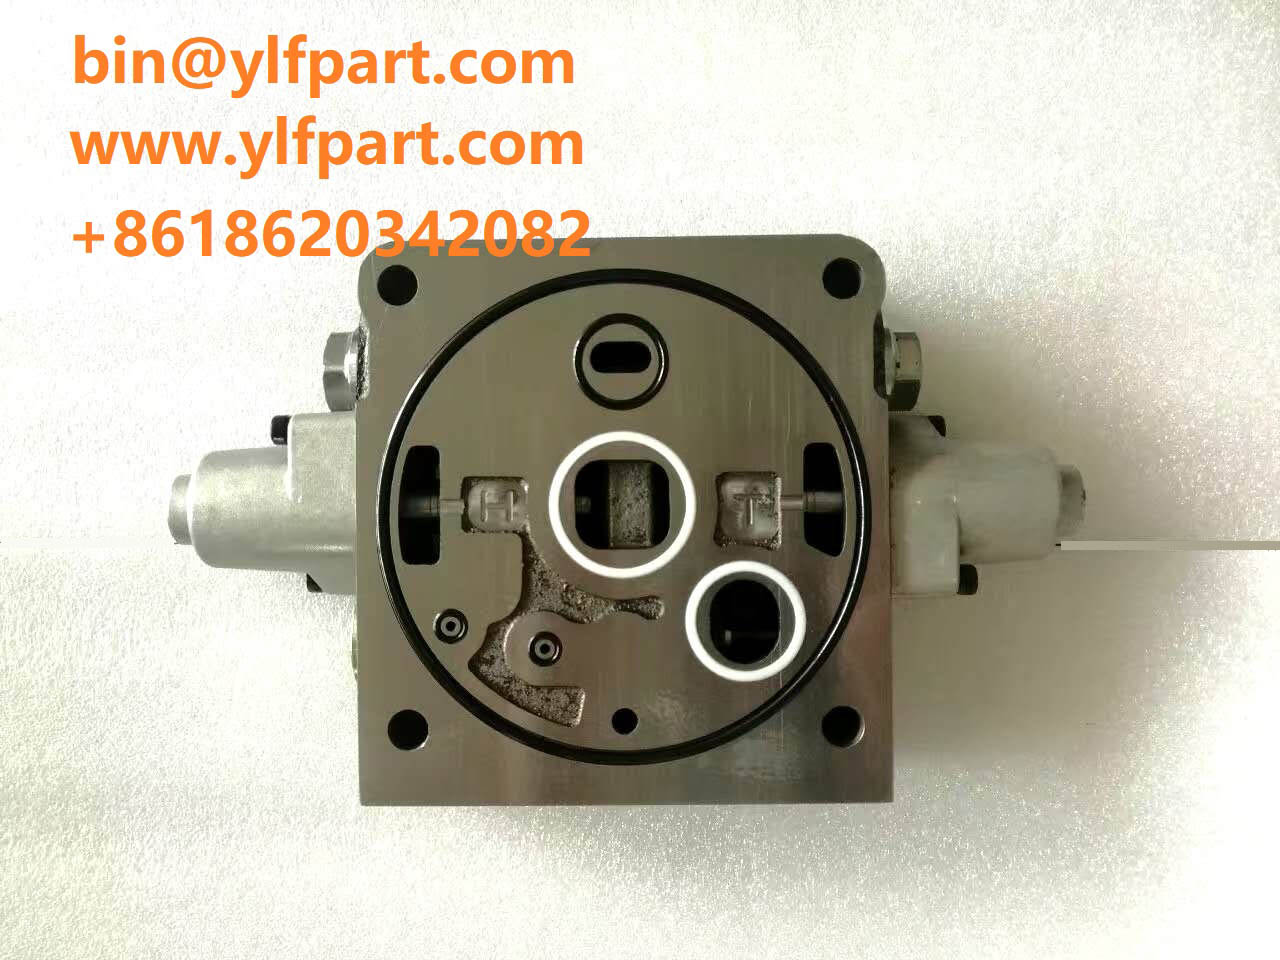 Excavator Komatus PC360-8 spare parts PC400-8 PC360-7 extra spool valve for hydraulic hammer lines piping kits 